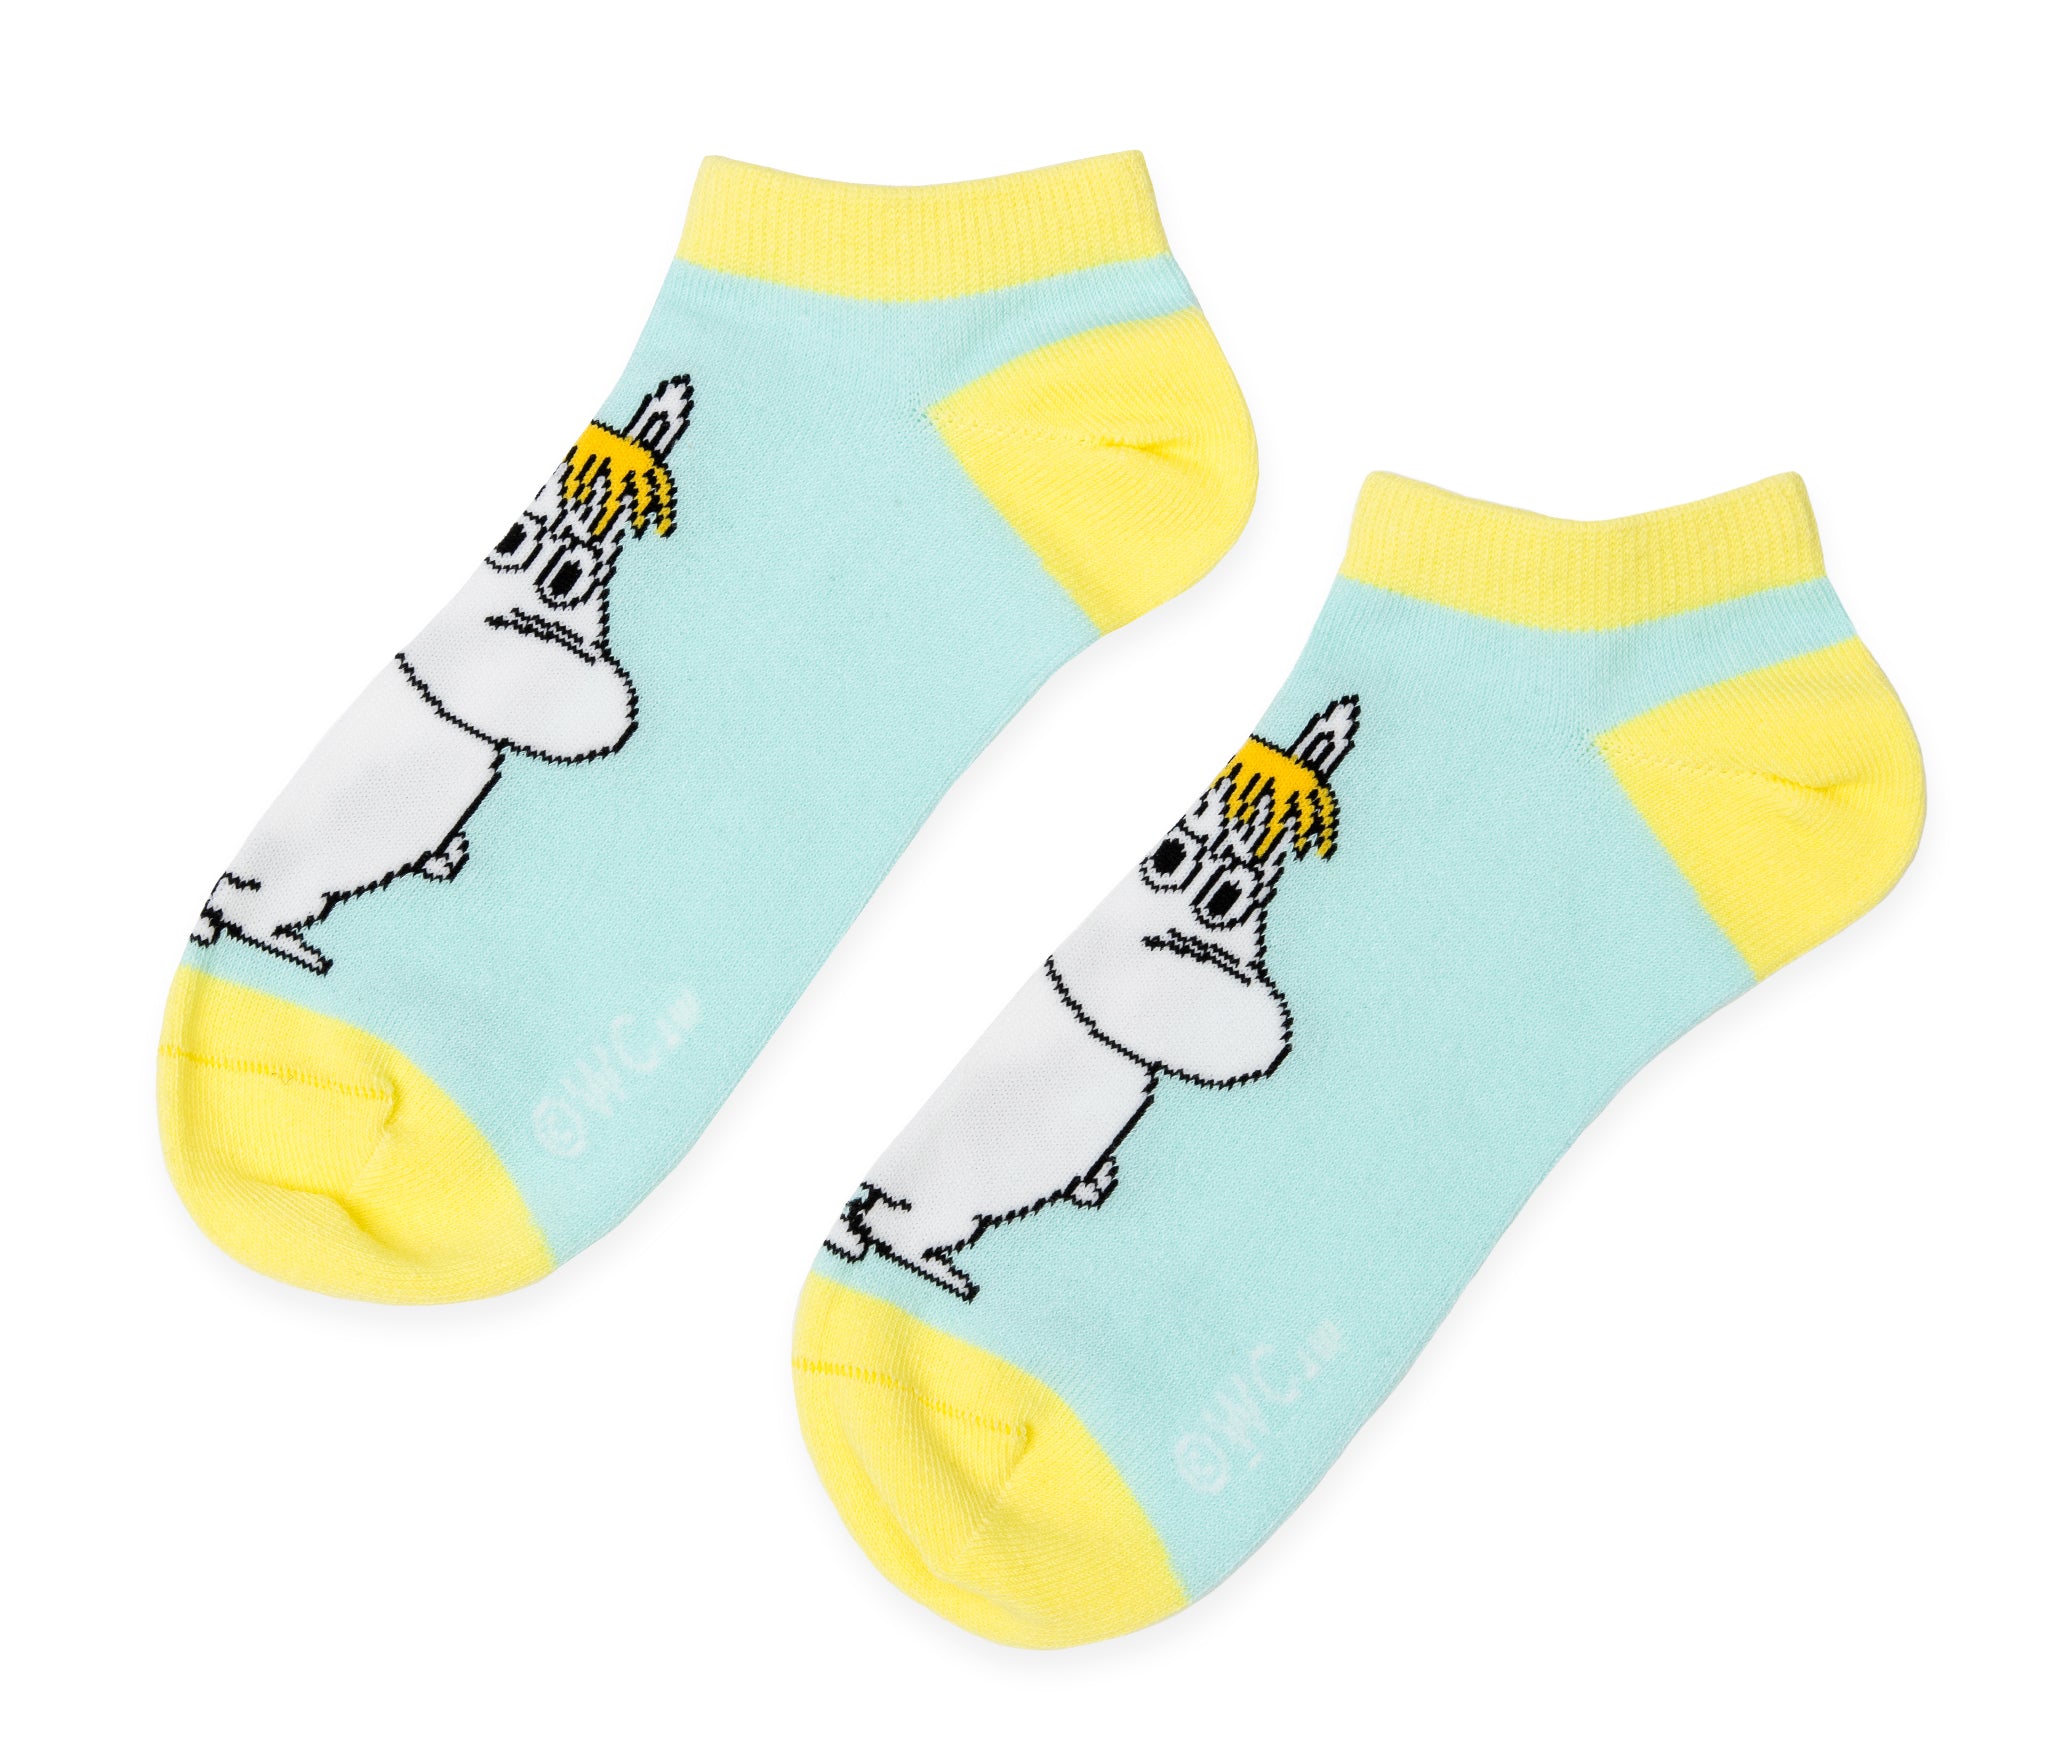 Snorkmaiden's Temper Ladies Ankle Socks - Pastel Mint and Yellow